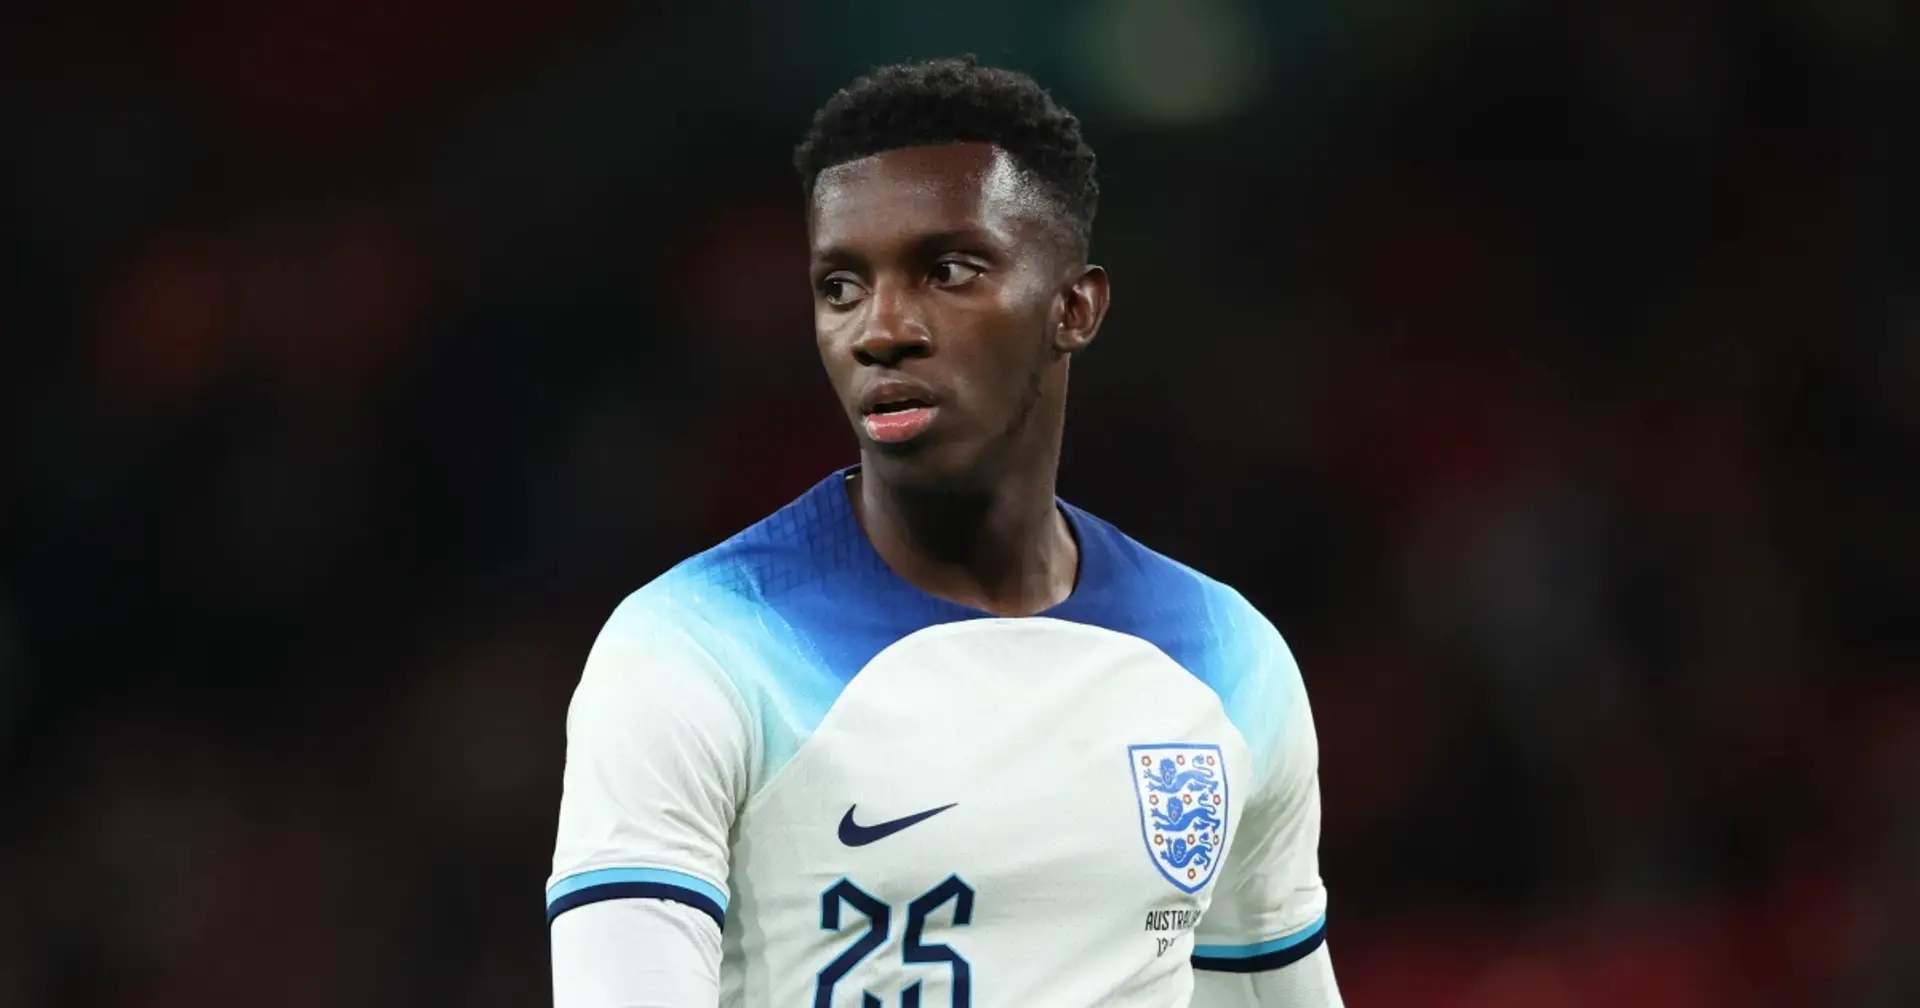 'We would never say never': Ghana not giving up on Eddie Nketiah despite England friendly appearance